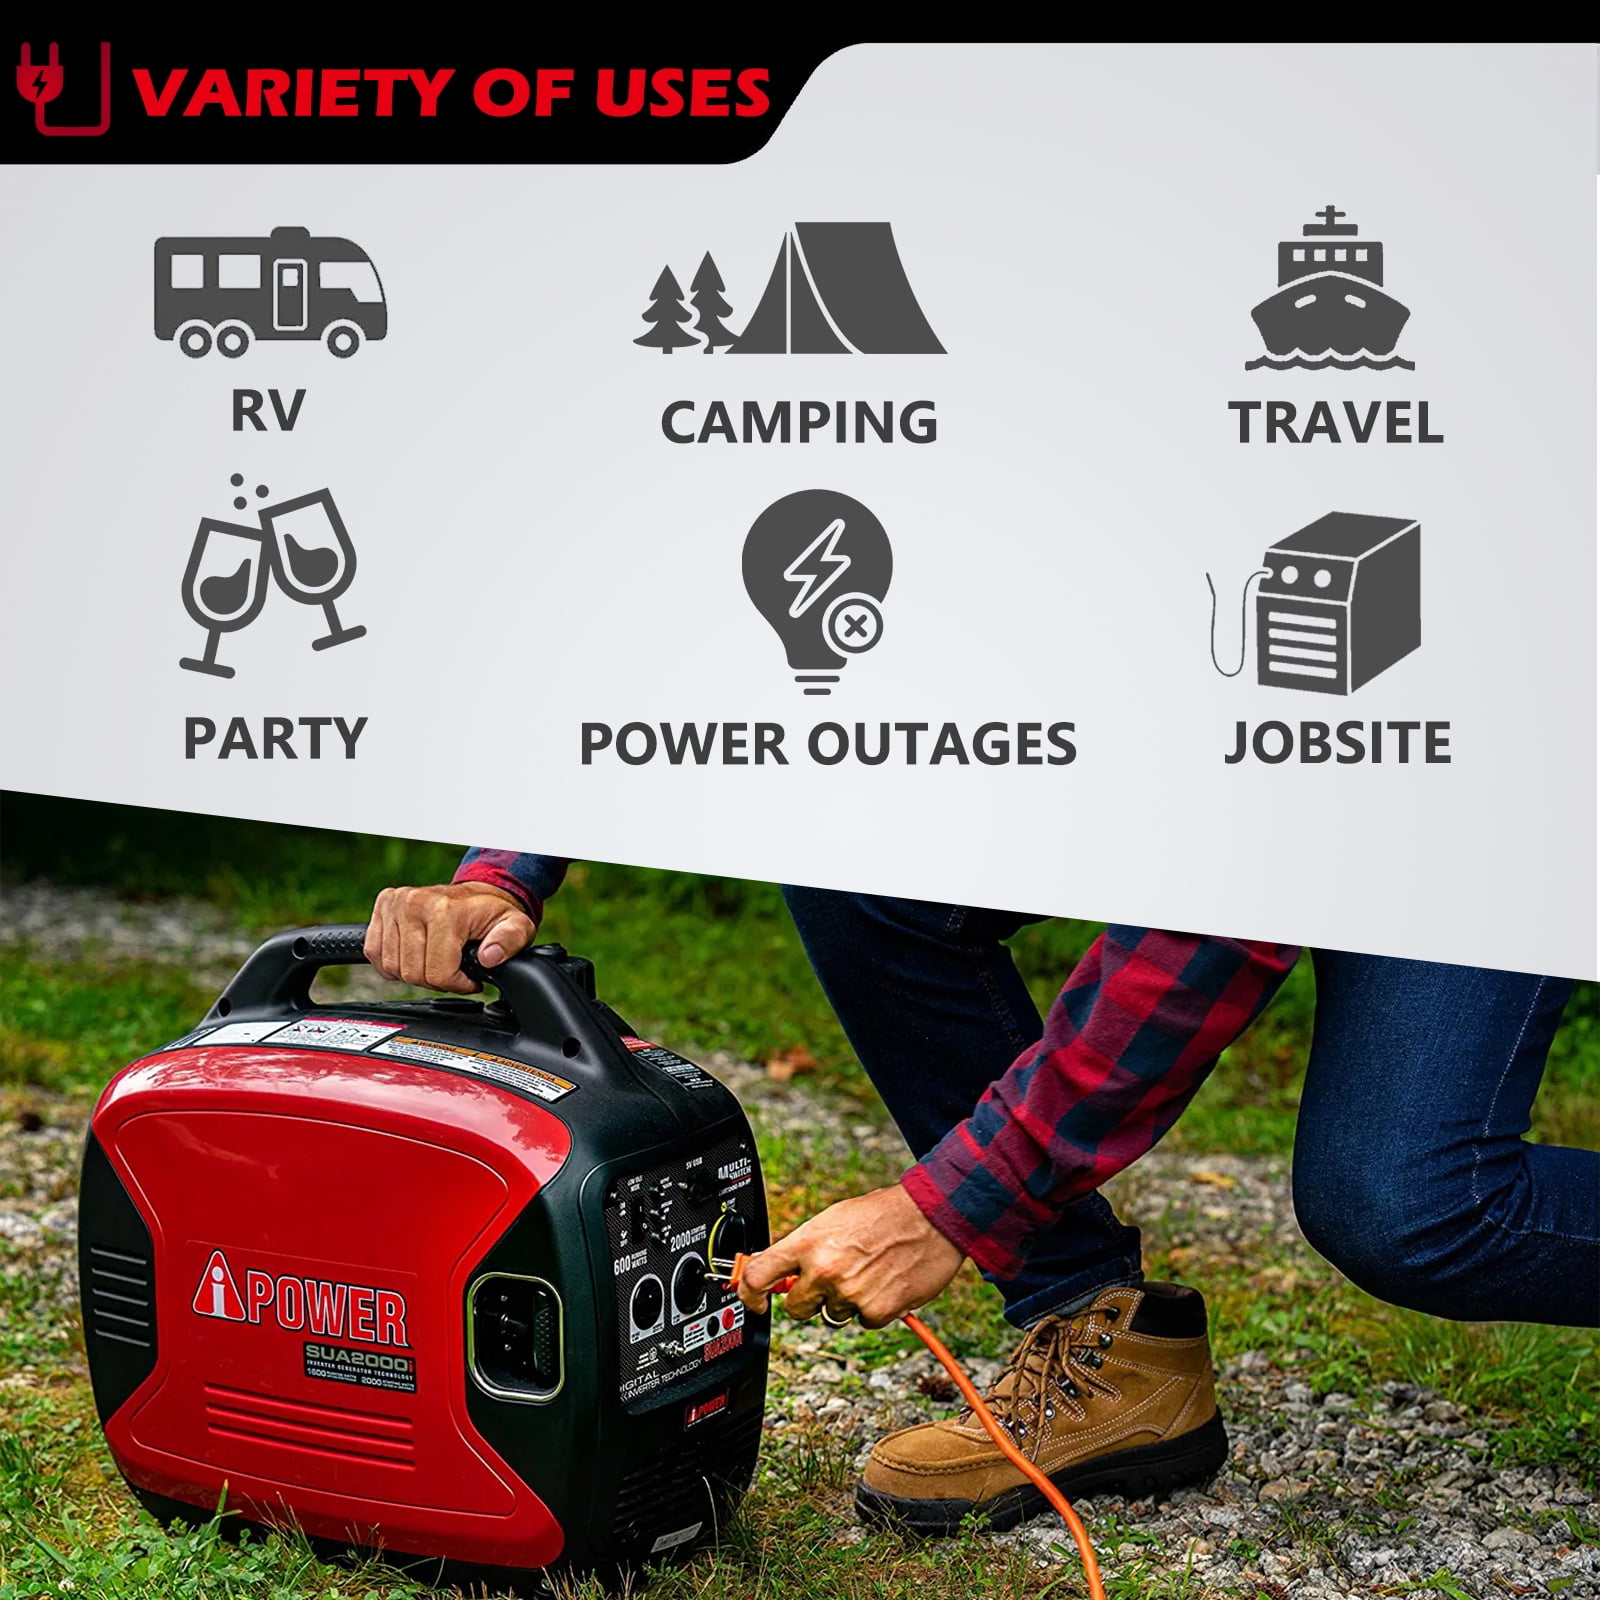 A-iPower Portable Inverter Generator, 2000W Ultra-Quiet RV Ready, EPA  Compliant, Small & Ultra Lightweight For Backup Home Use, Tailgating &  Camping